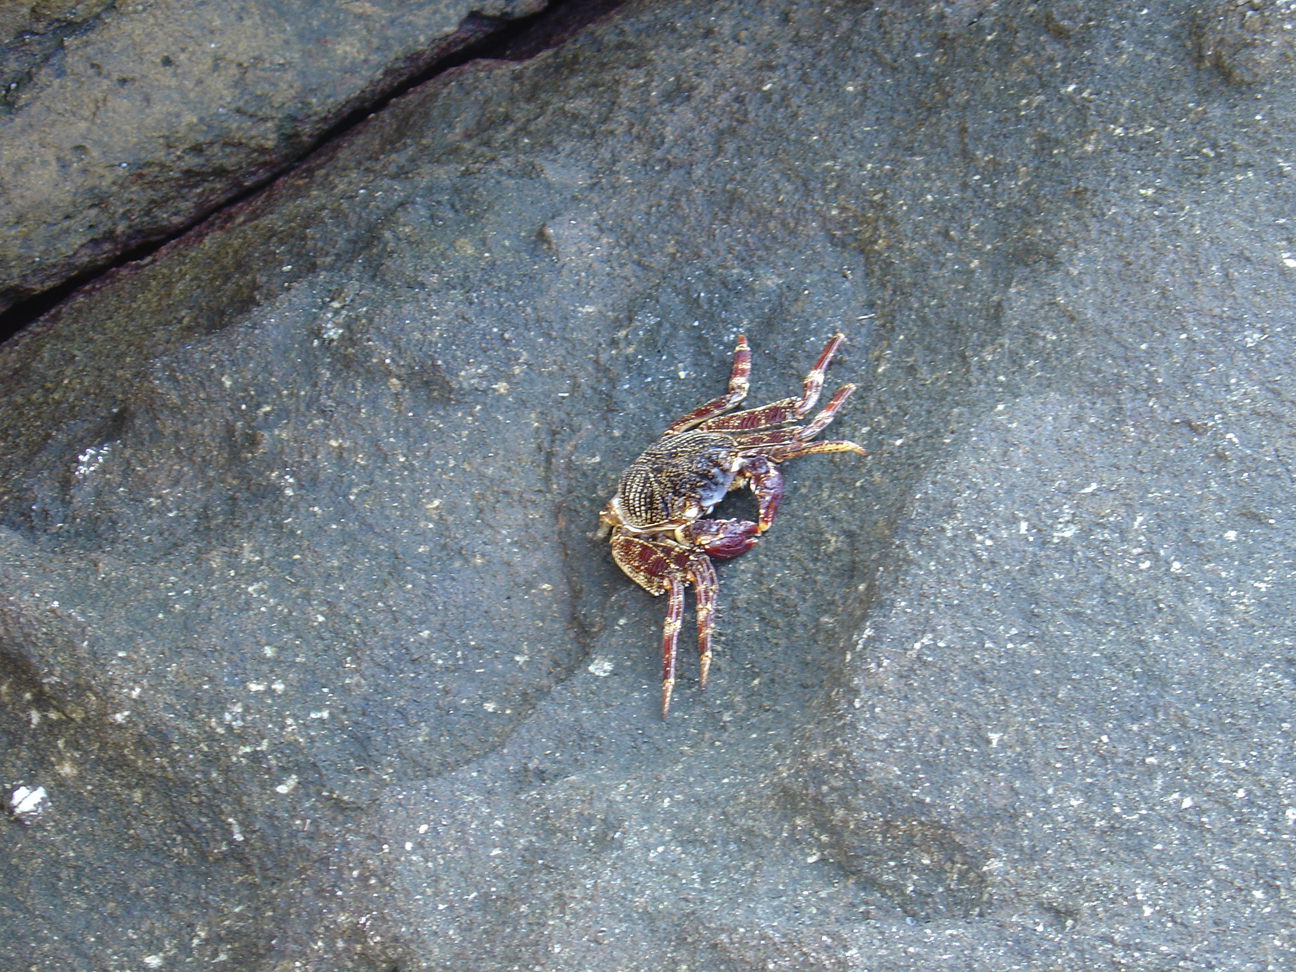 A crab resting on a rock.